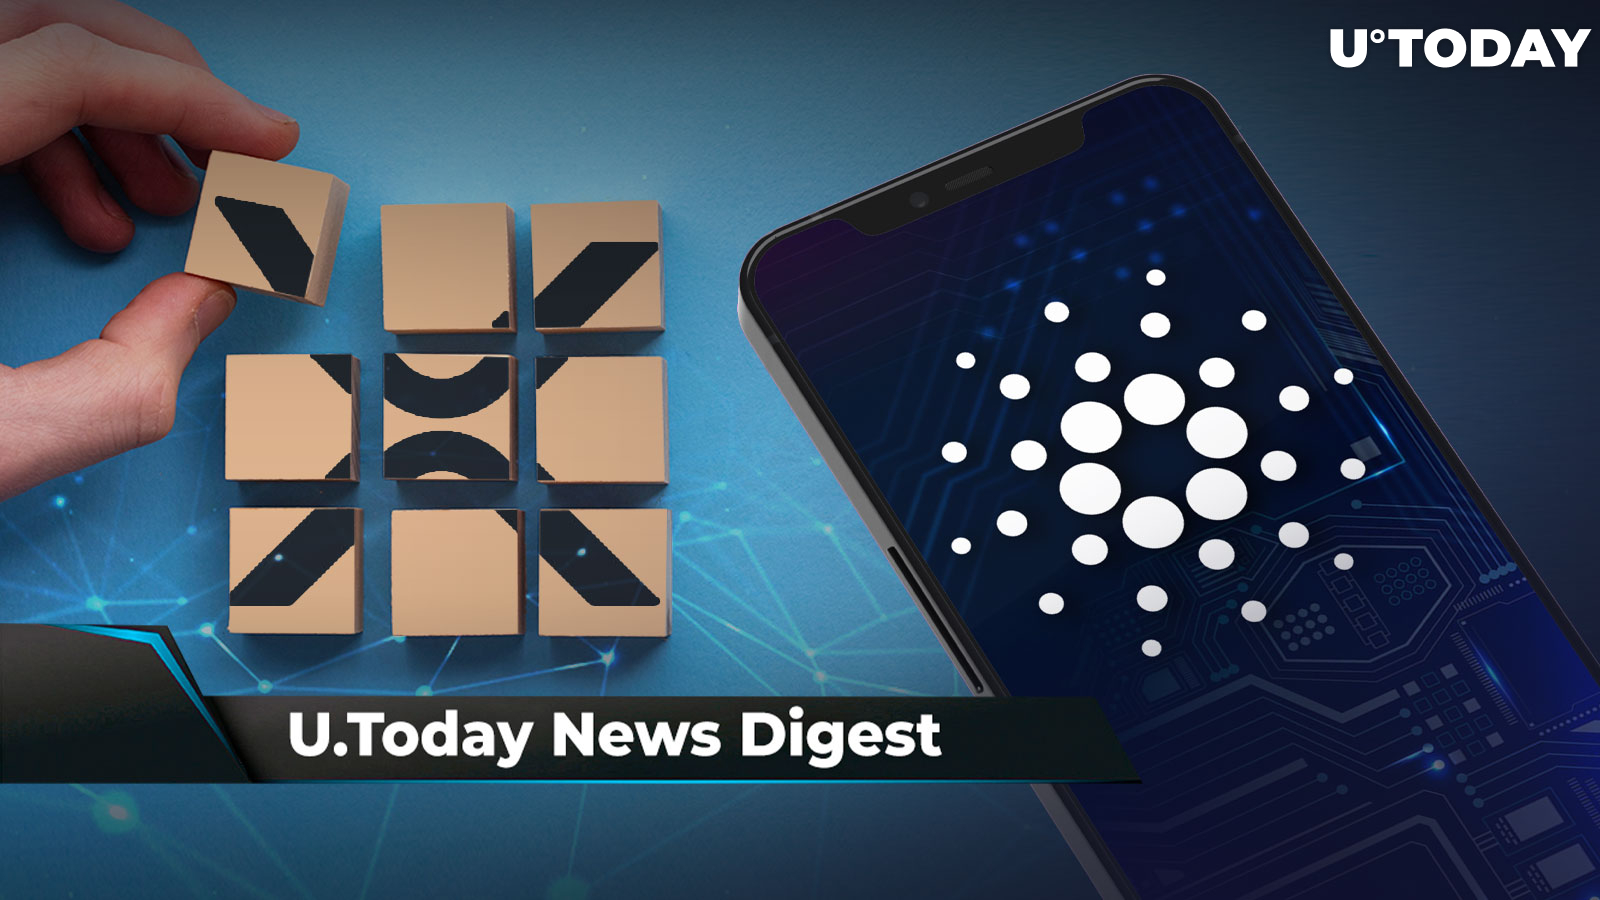 226 Billion SHIB Moved Hours Before Major Milestone, Cardano’s First Telemedicine App Goes Live, XRP's Last Piece of Puzzle Snapped into Place: Crypto News Digest by U.Today